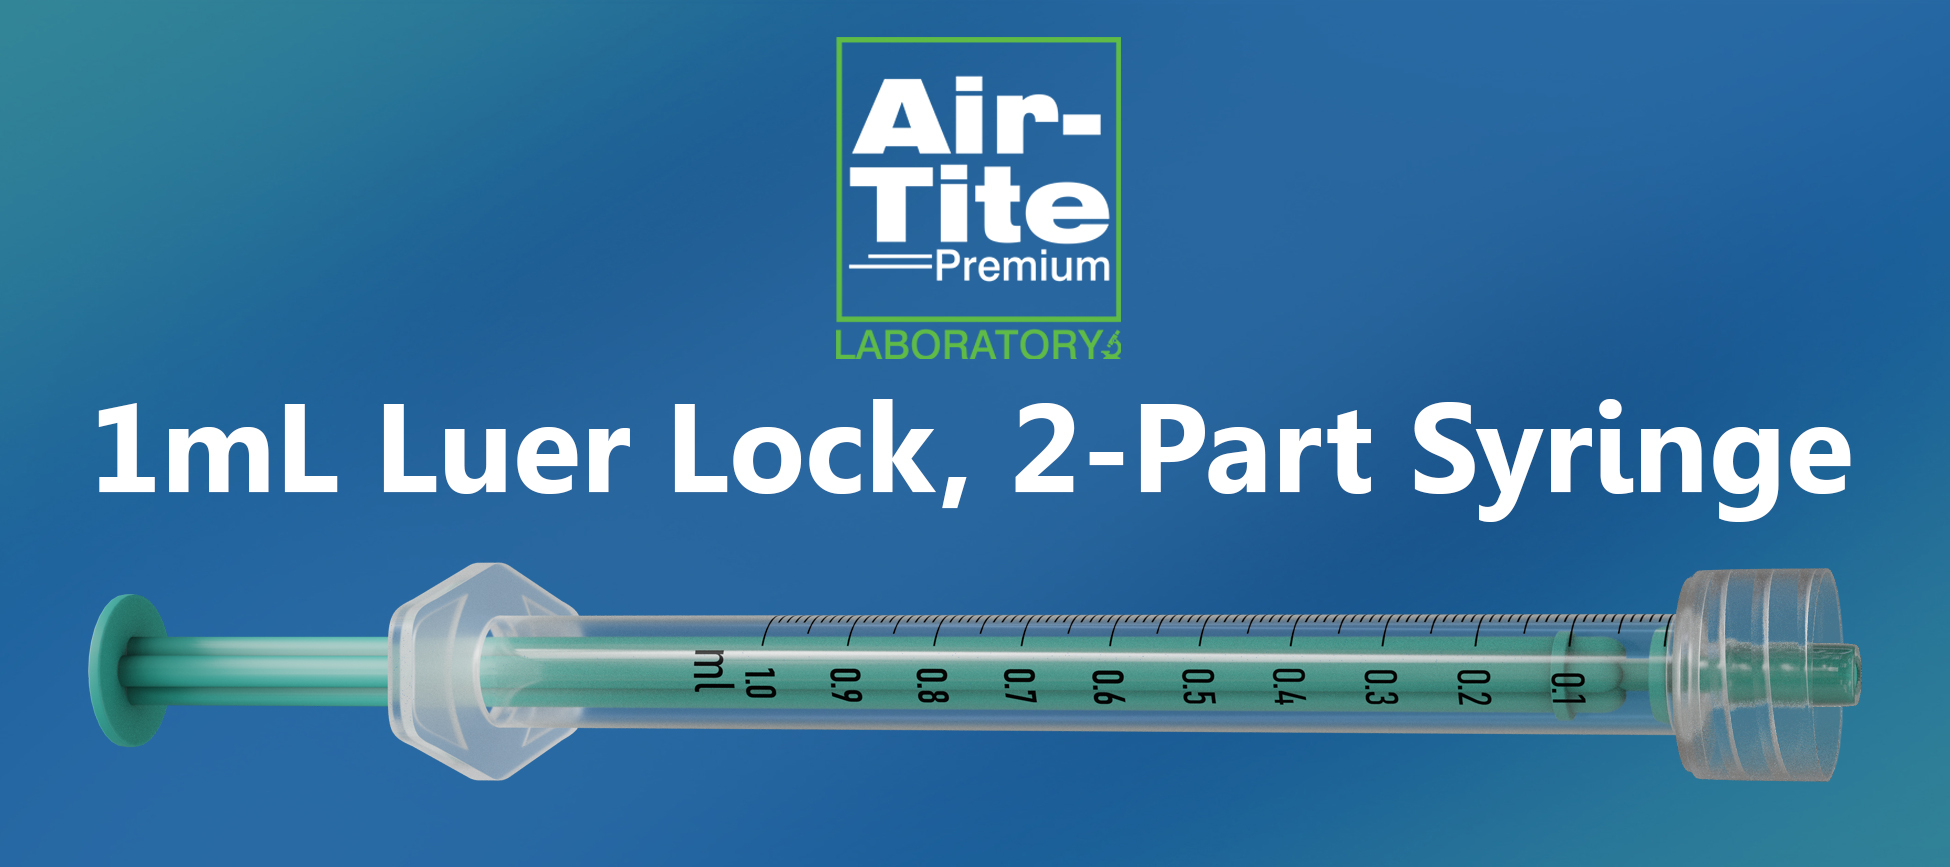 Brand new 1mL Luer Lock 2-Part Syringe from Air-Tite Products